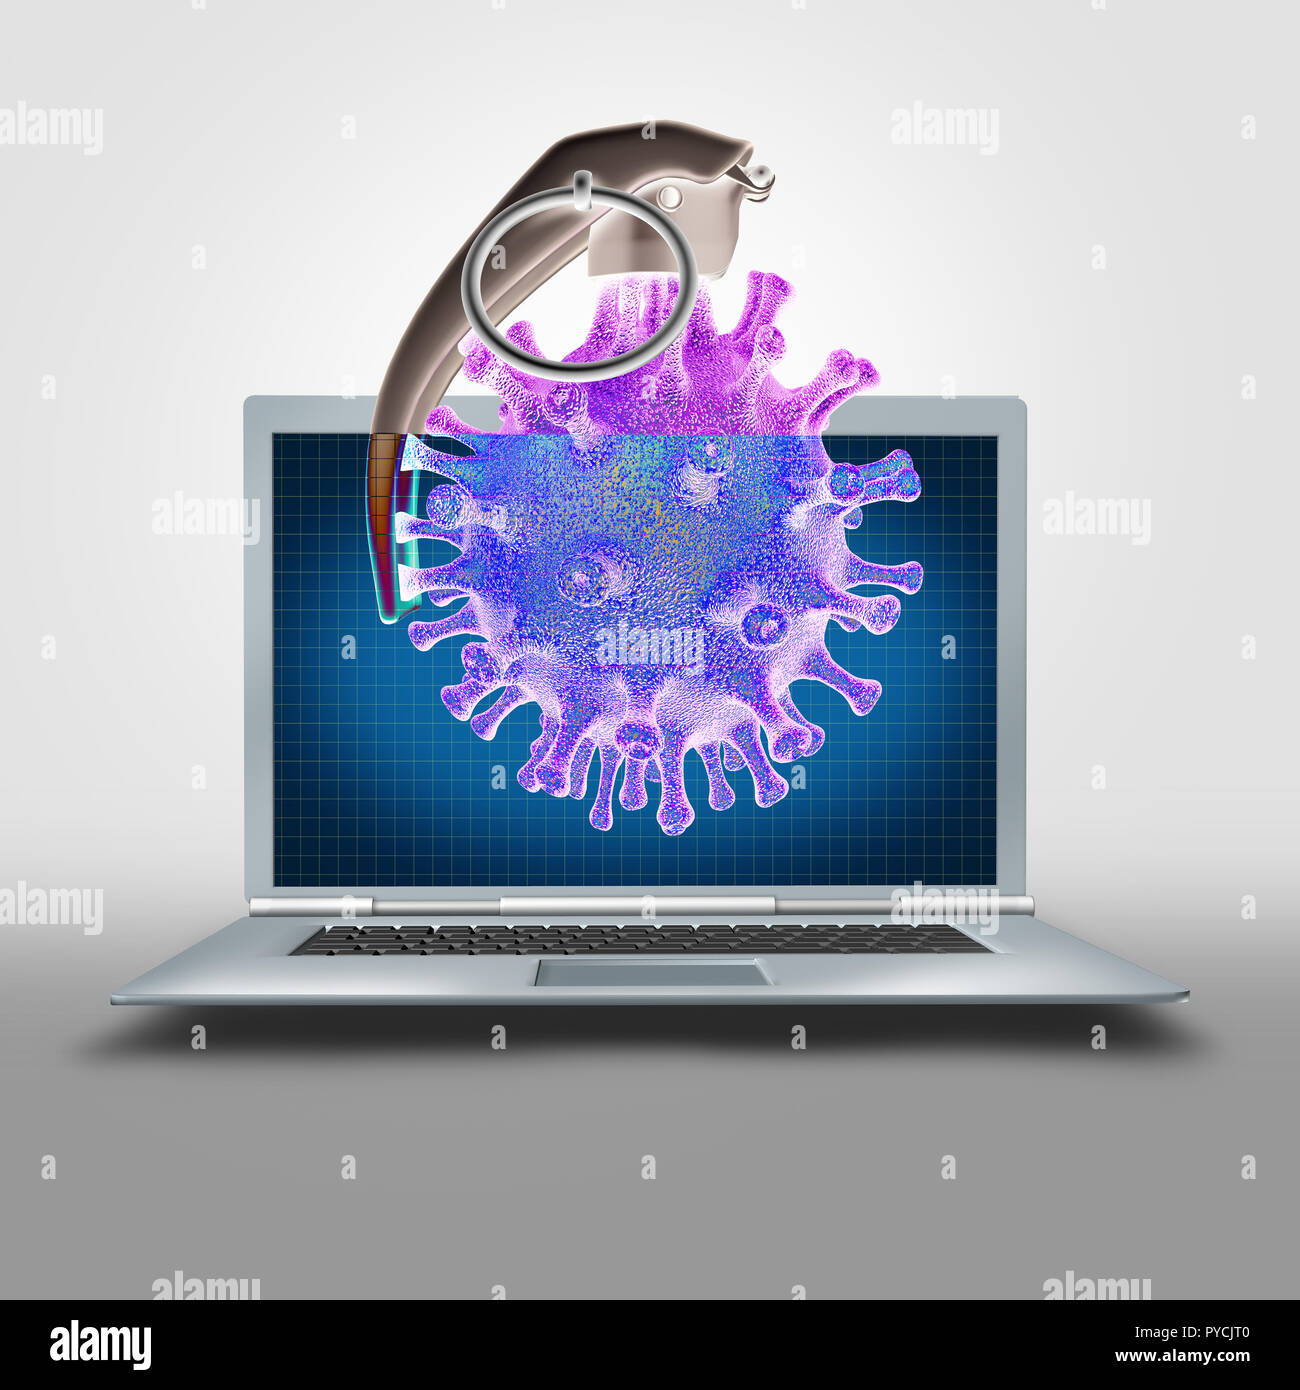 Logic bomb or computer virus symbol and malicious software or trojan horses and cyberwarfare icon on a laptop mobile device as a 3D illustration. Stock Photo